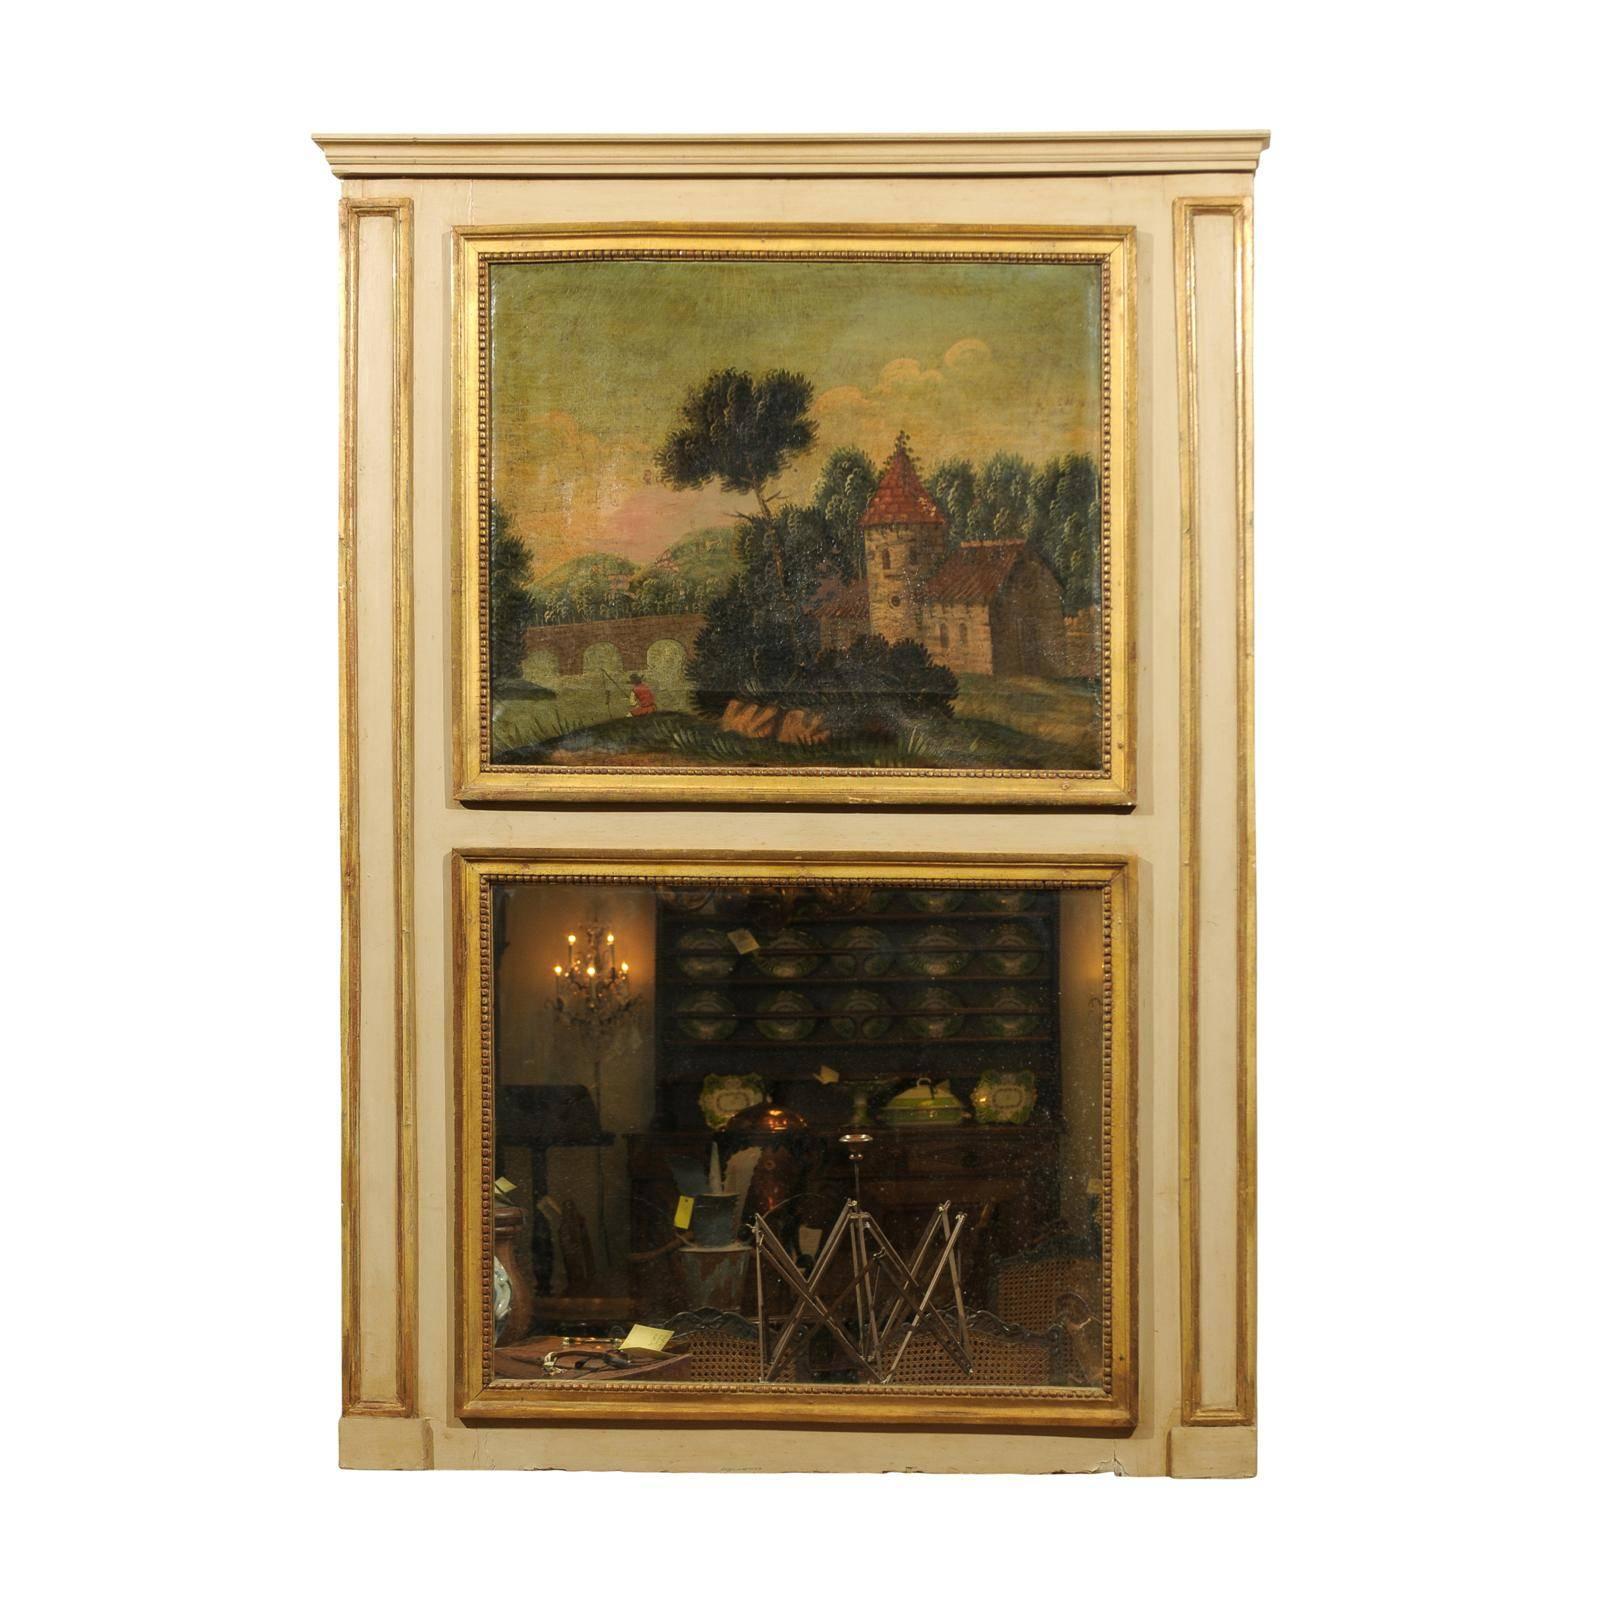 French Painted and Parcel-Gilt Trumeau Mirror with Landscape Painting